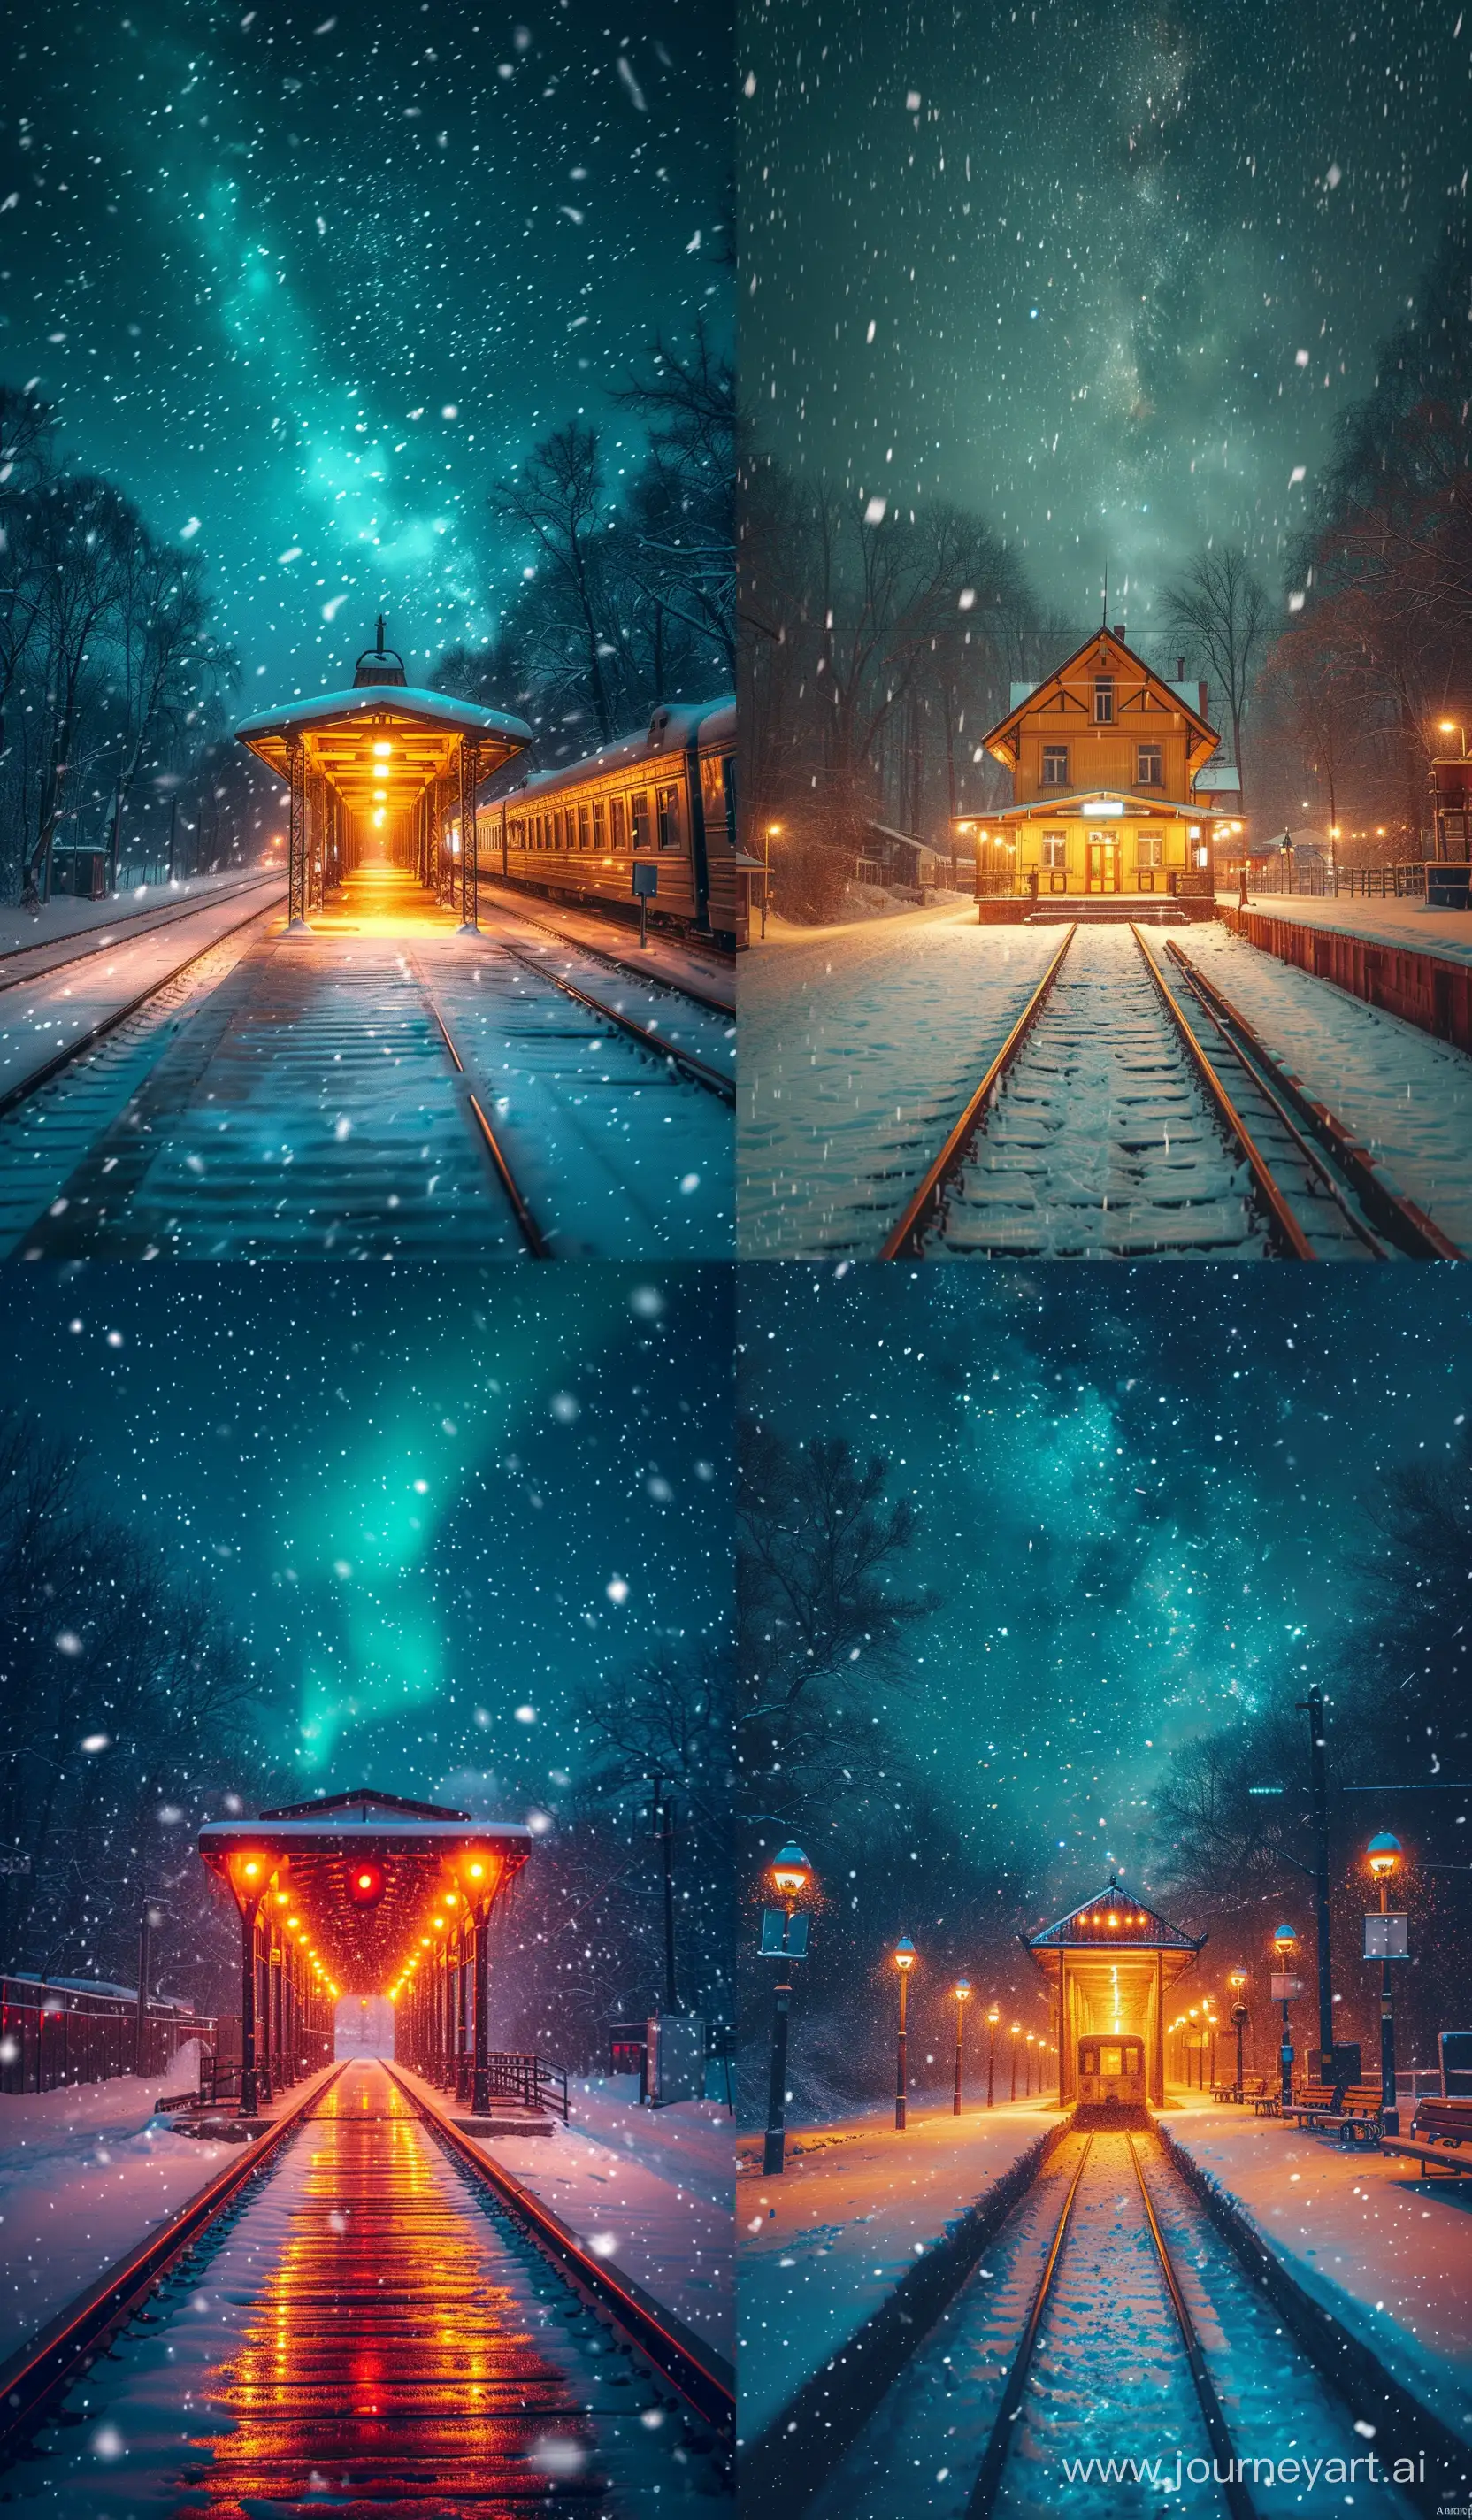 Lonely-Snowy-Night-at-the-Rail-Station-with-Starry-Sky-and-Aurora